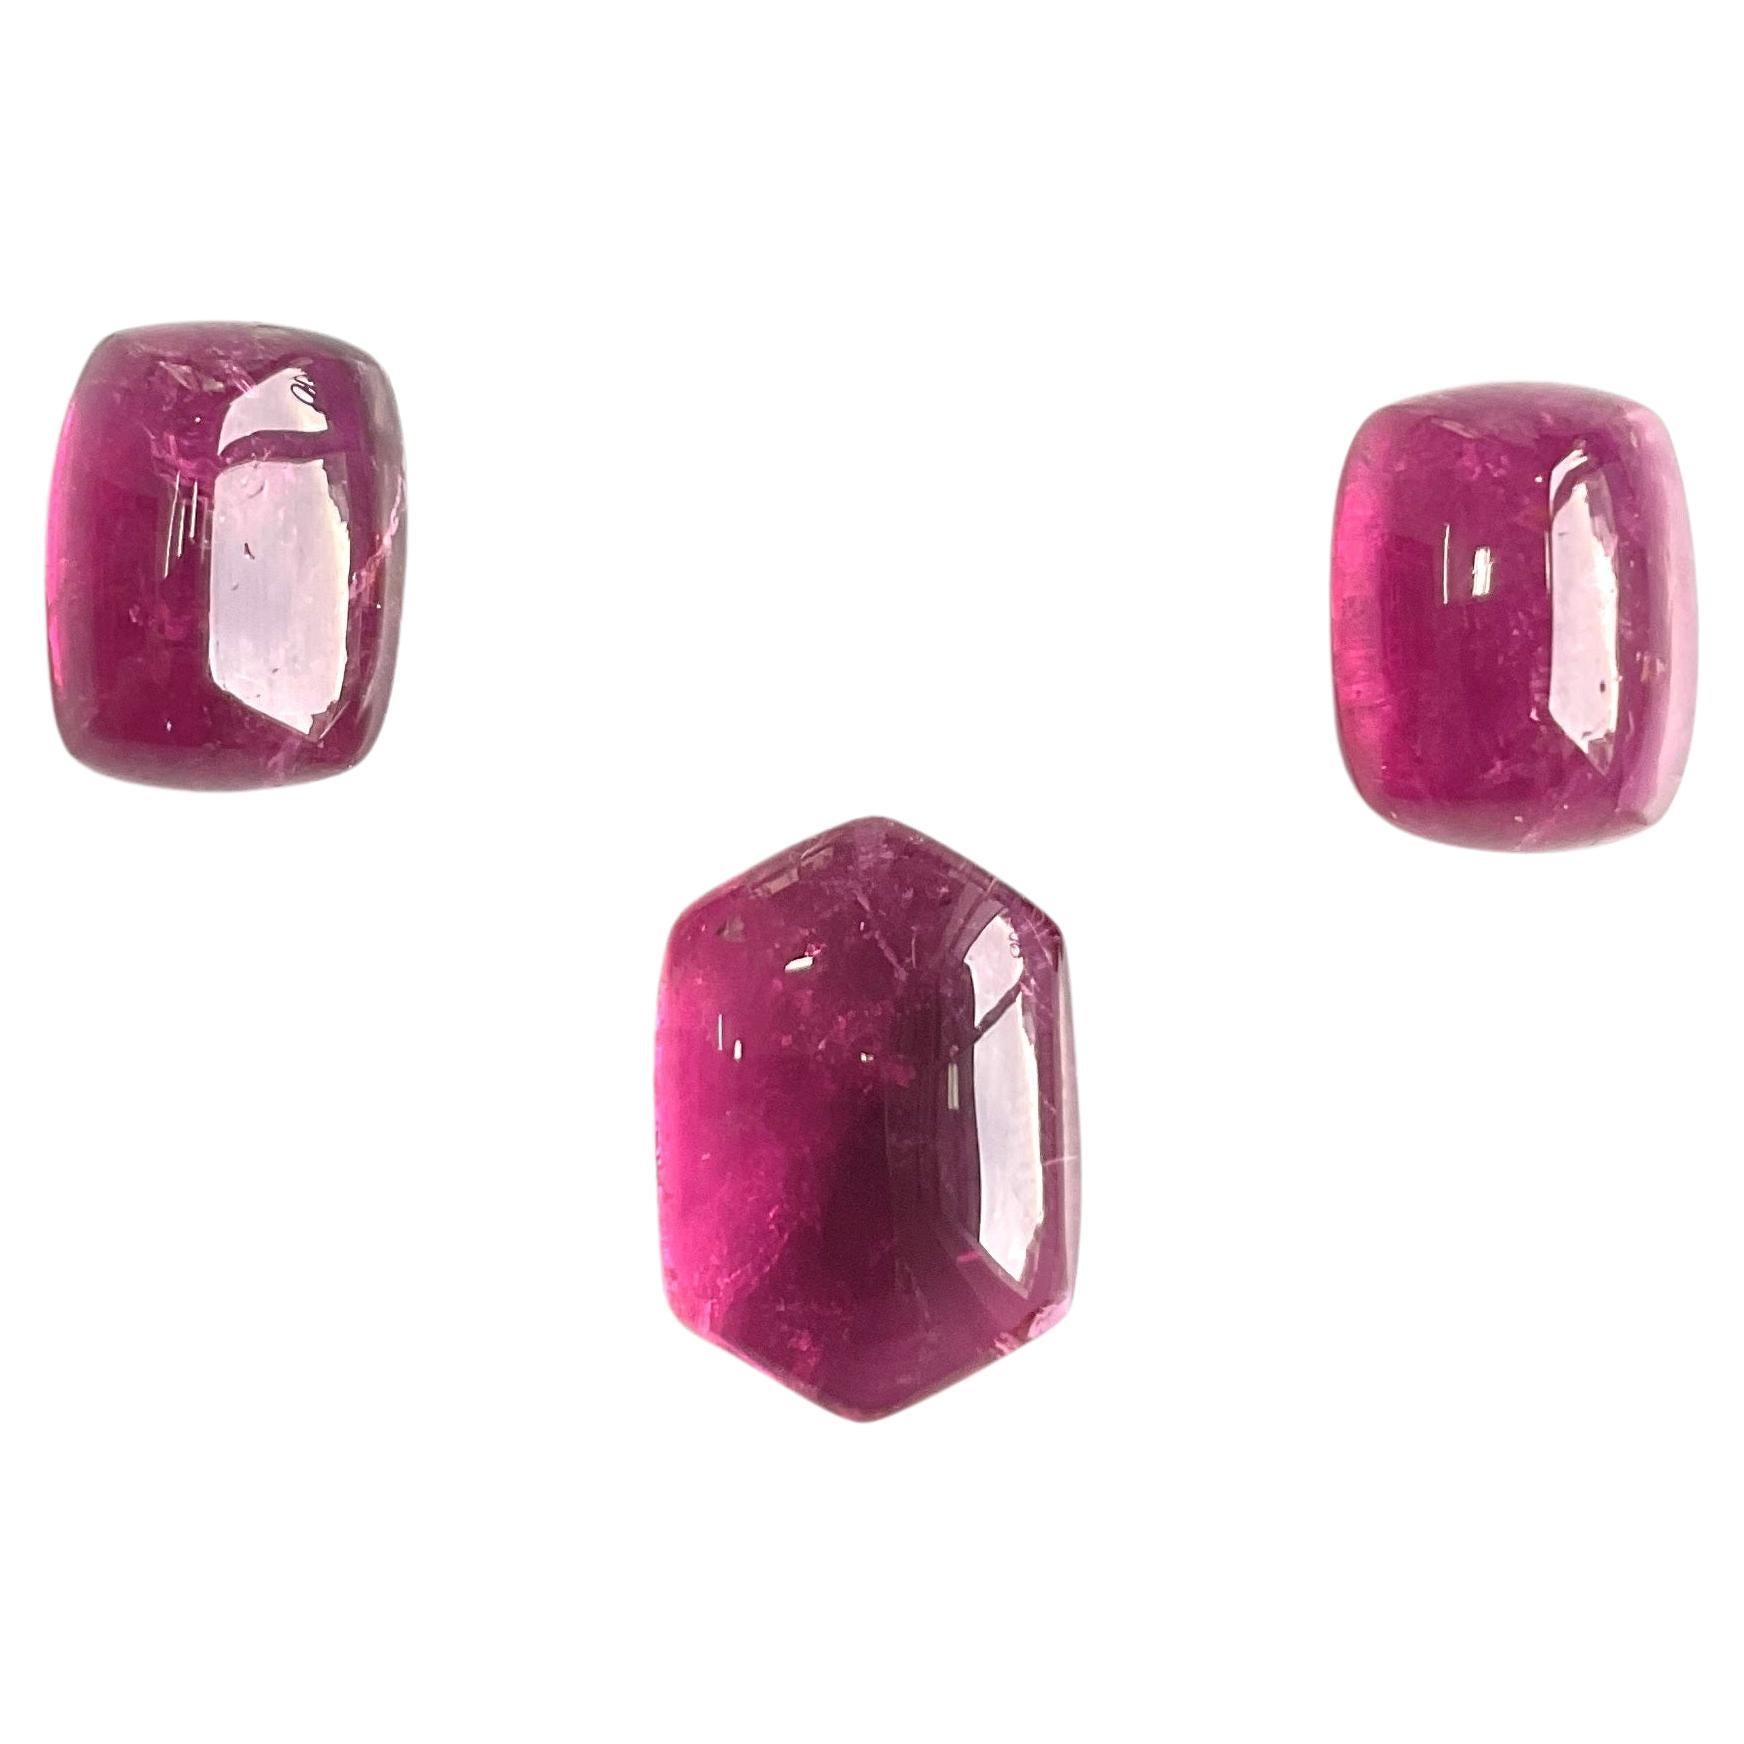 44.85 Carats Rubellite Tourmaline 3 Pieces Top Fine Jewelry Set Natural Gemstone For Sale